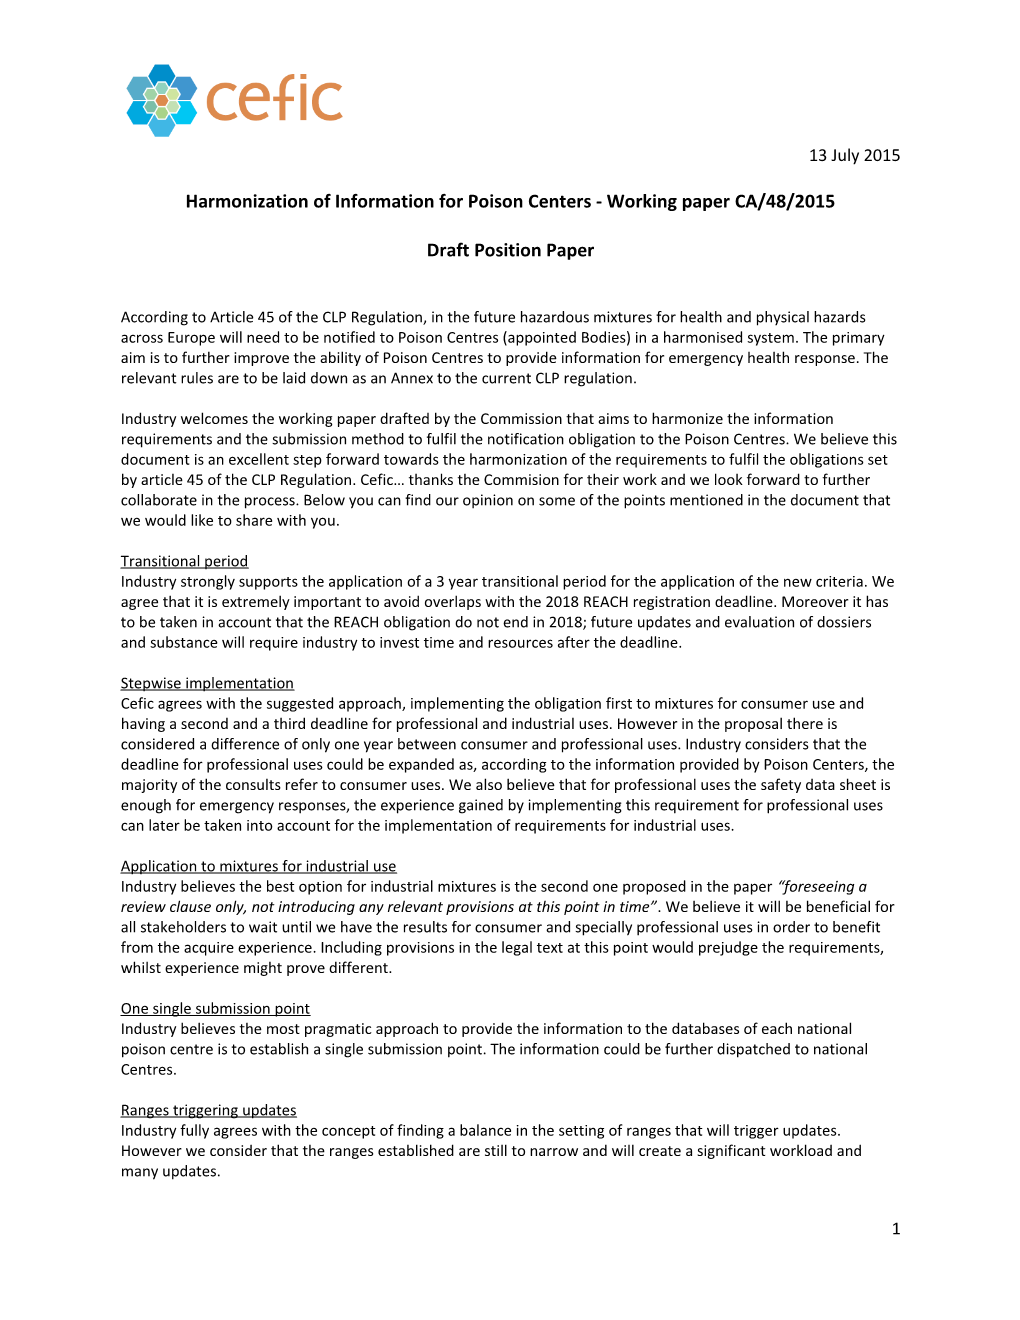 Harmonization of Information for Poison Centers - Working Paper CA/48/2015